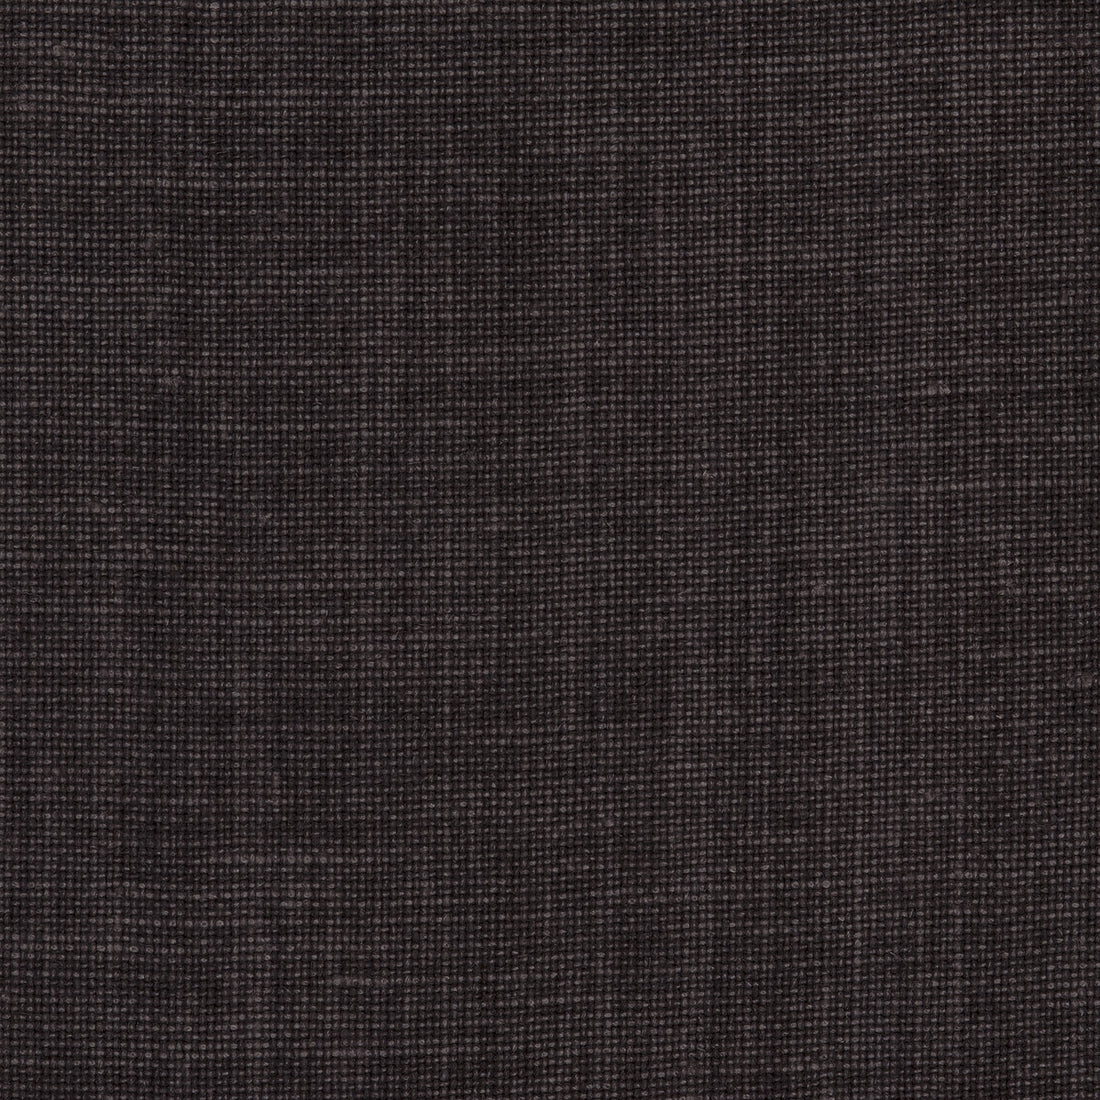 Kravet Basics fabric in 33767-68 color - pattern 33767.68.0 - by Kravet Basics in the Perfect Plains collection